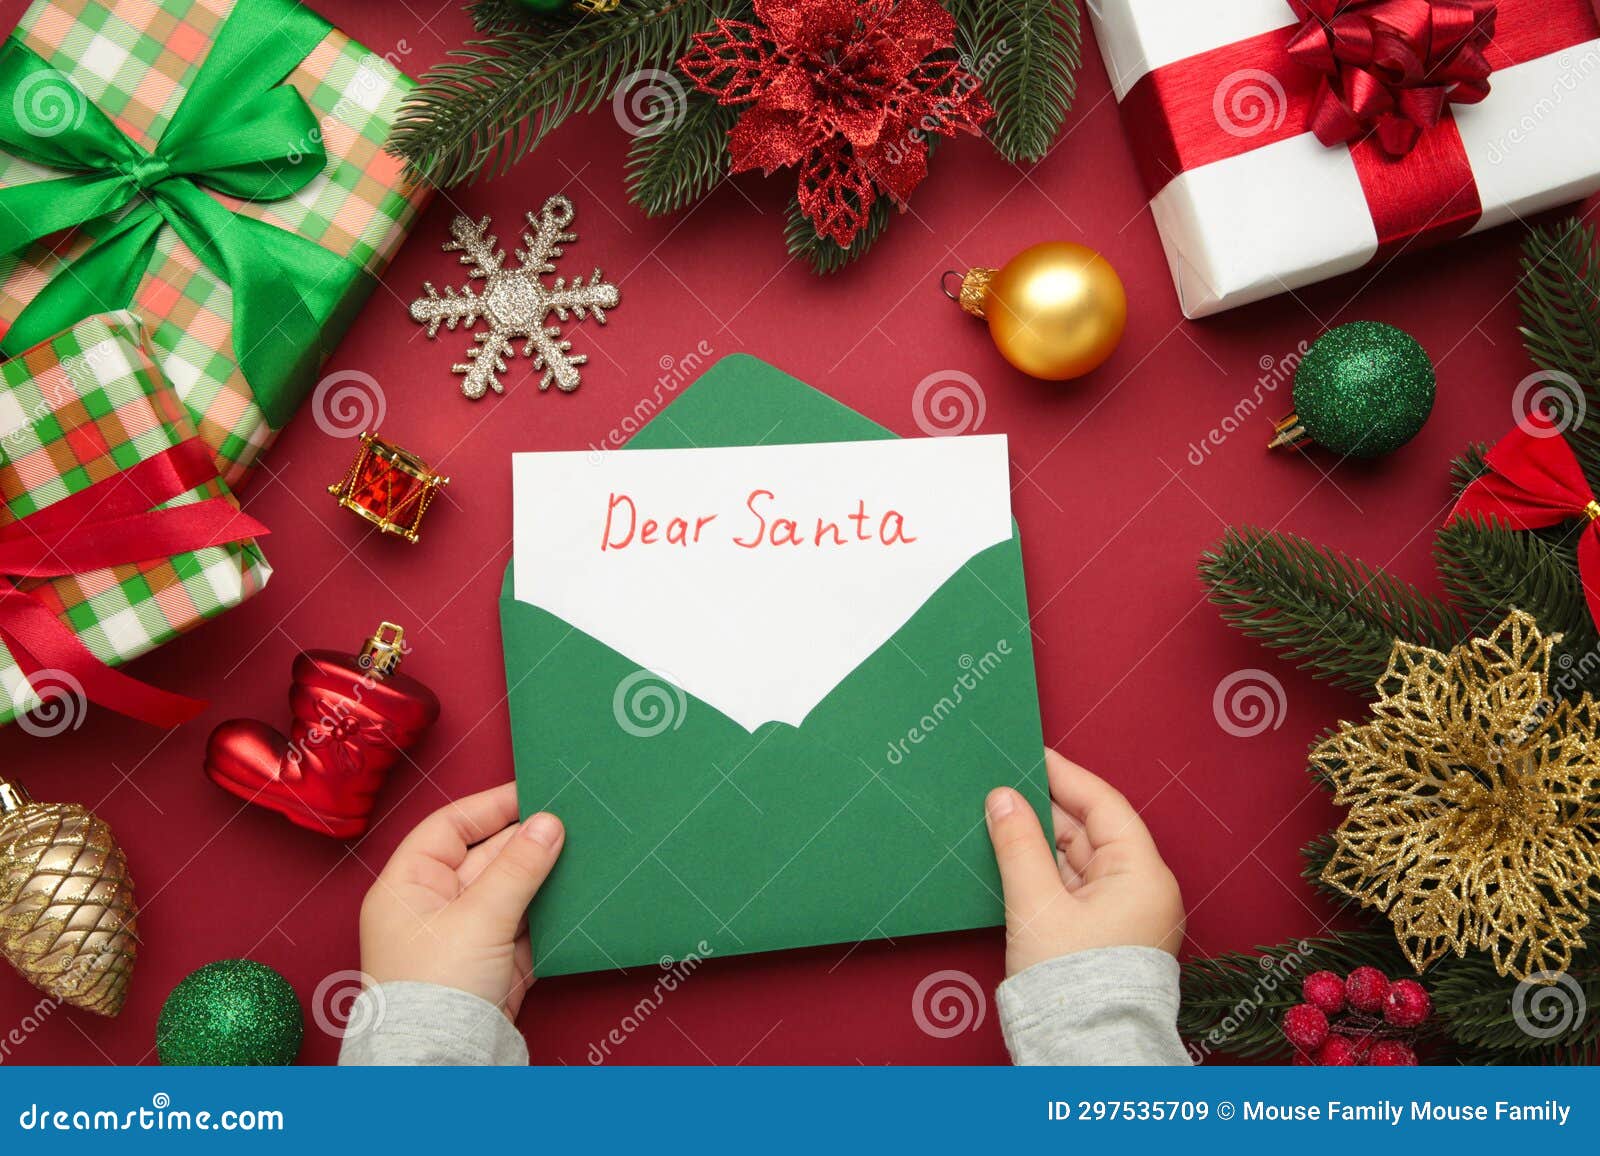 christmas letter from a child to santa claus with the words: dear santa. christmas composition with yellow and green toys